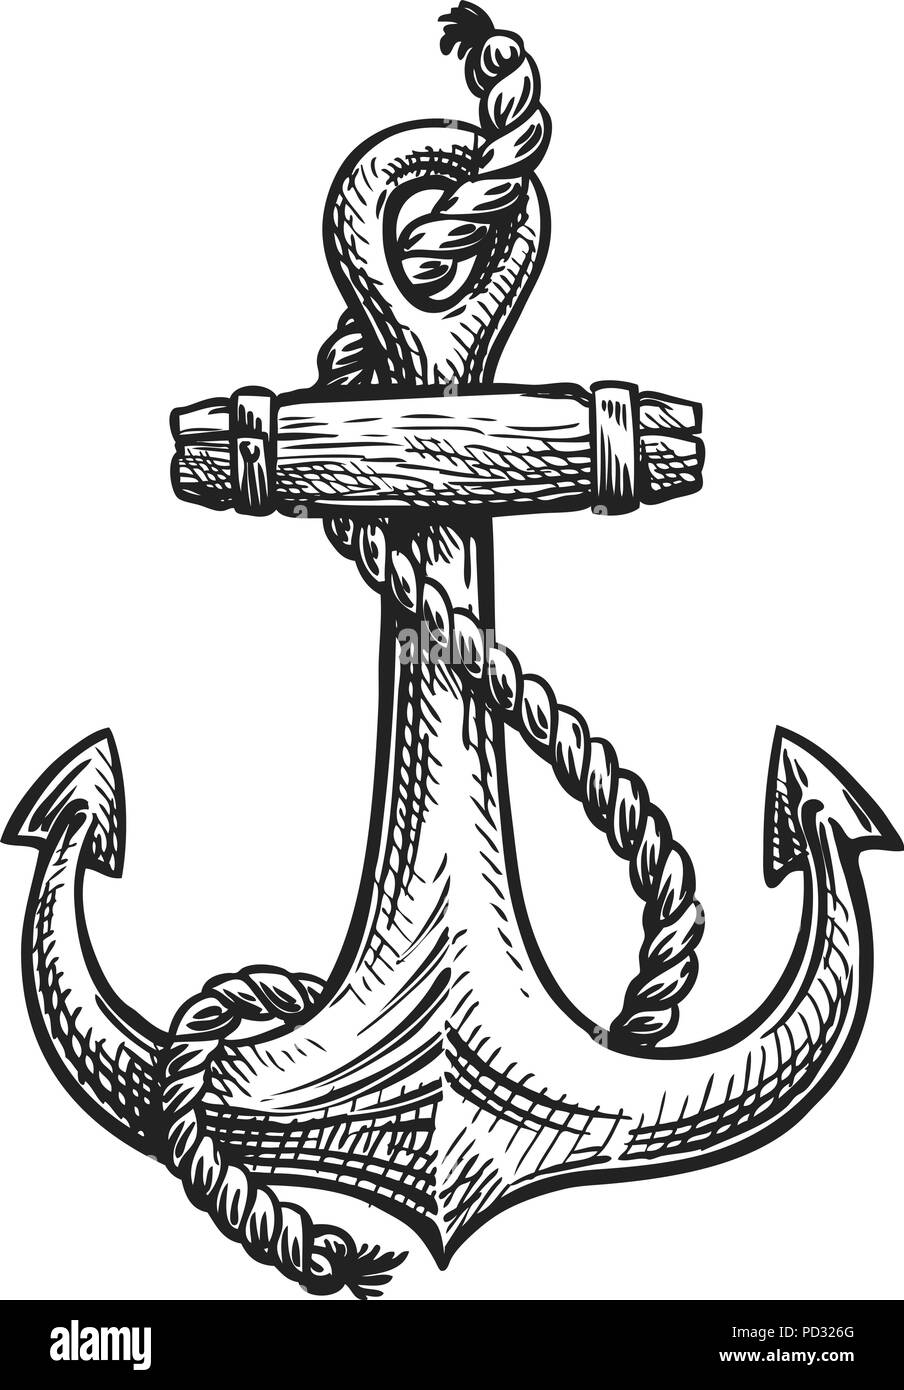 Anchor tattoo Black and White Stock Photos & Images - Alamy